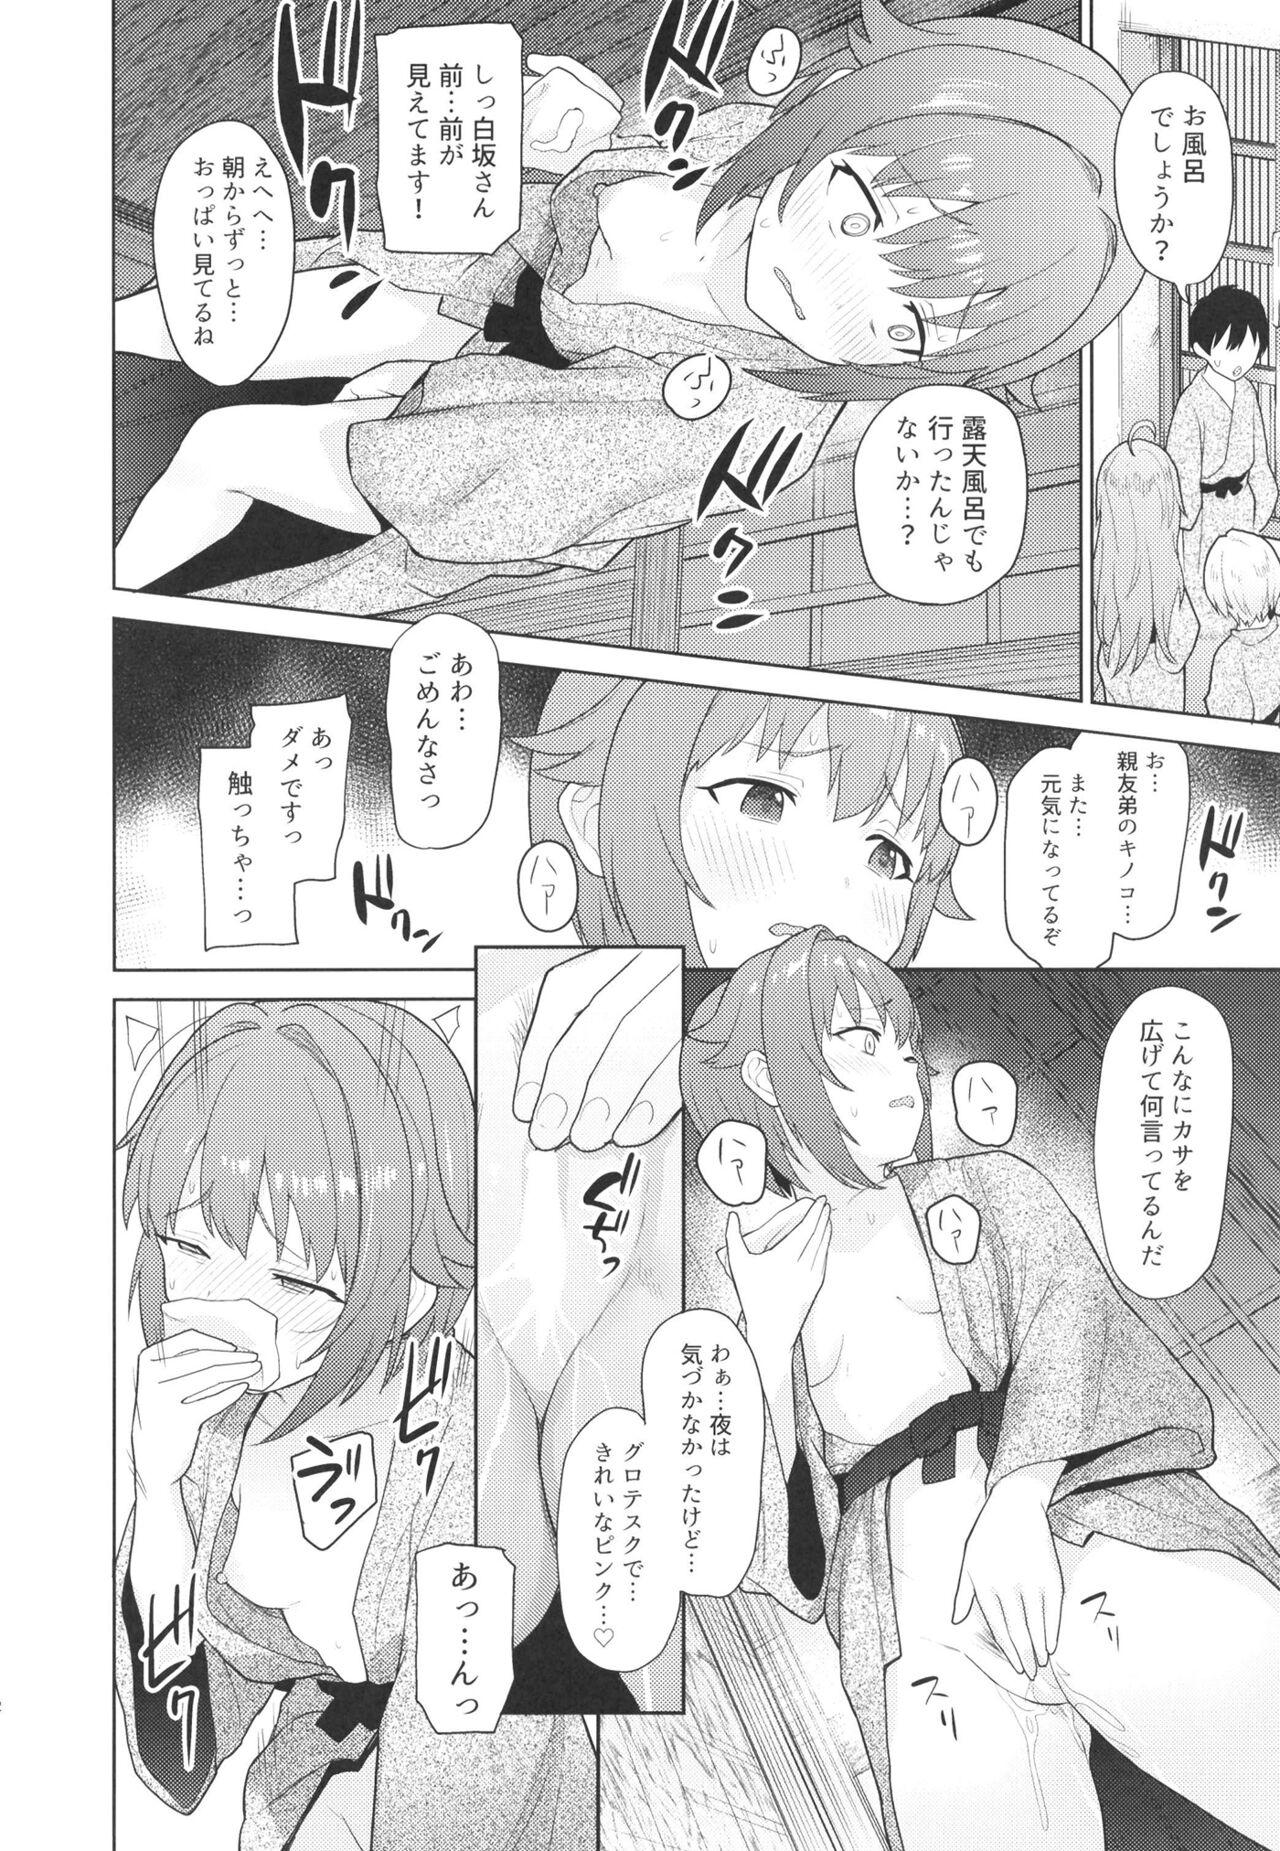 Leite Accent Circonflexe 3 - The idolmaster Cousin - Page 12